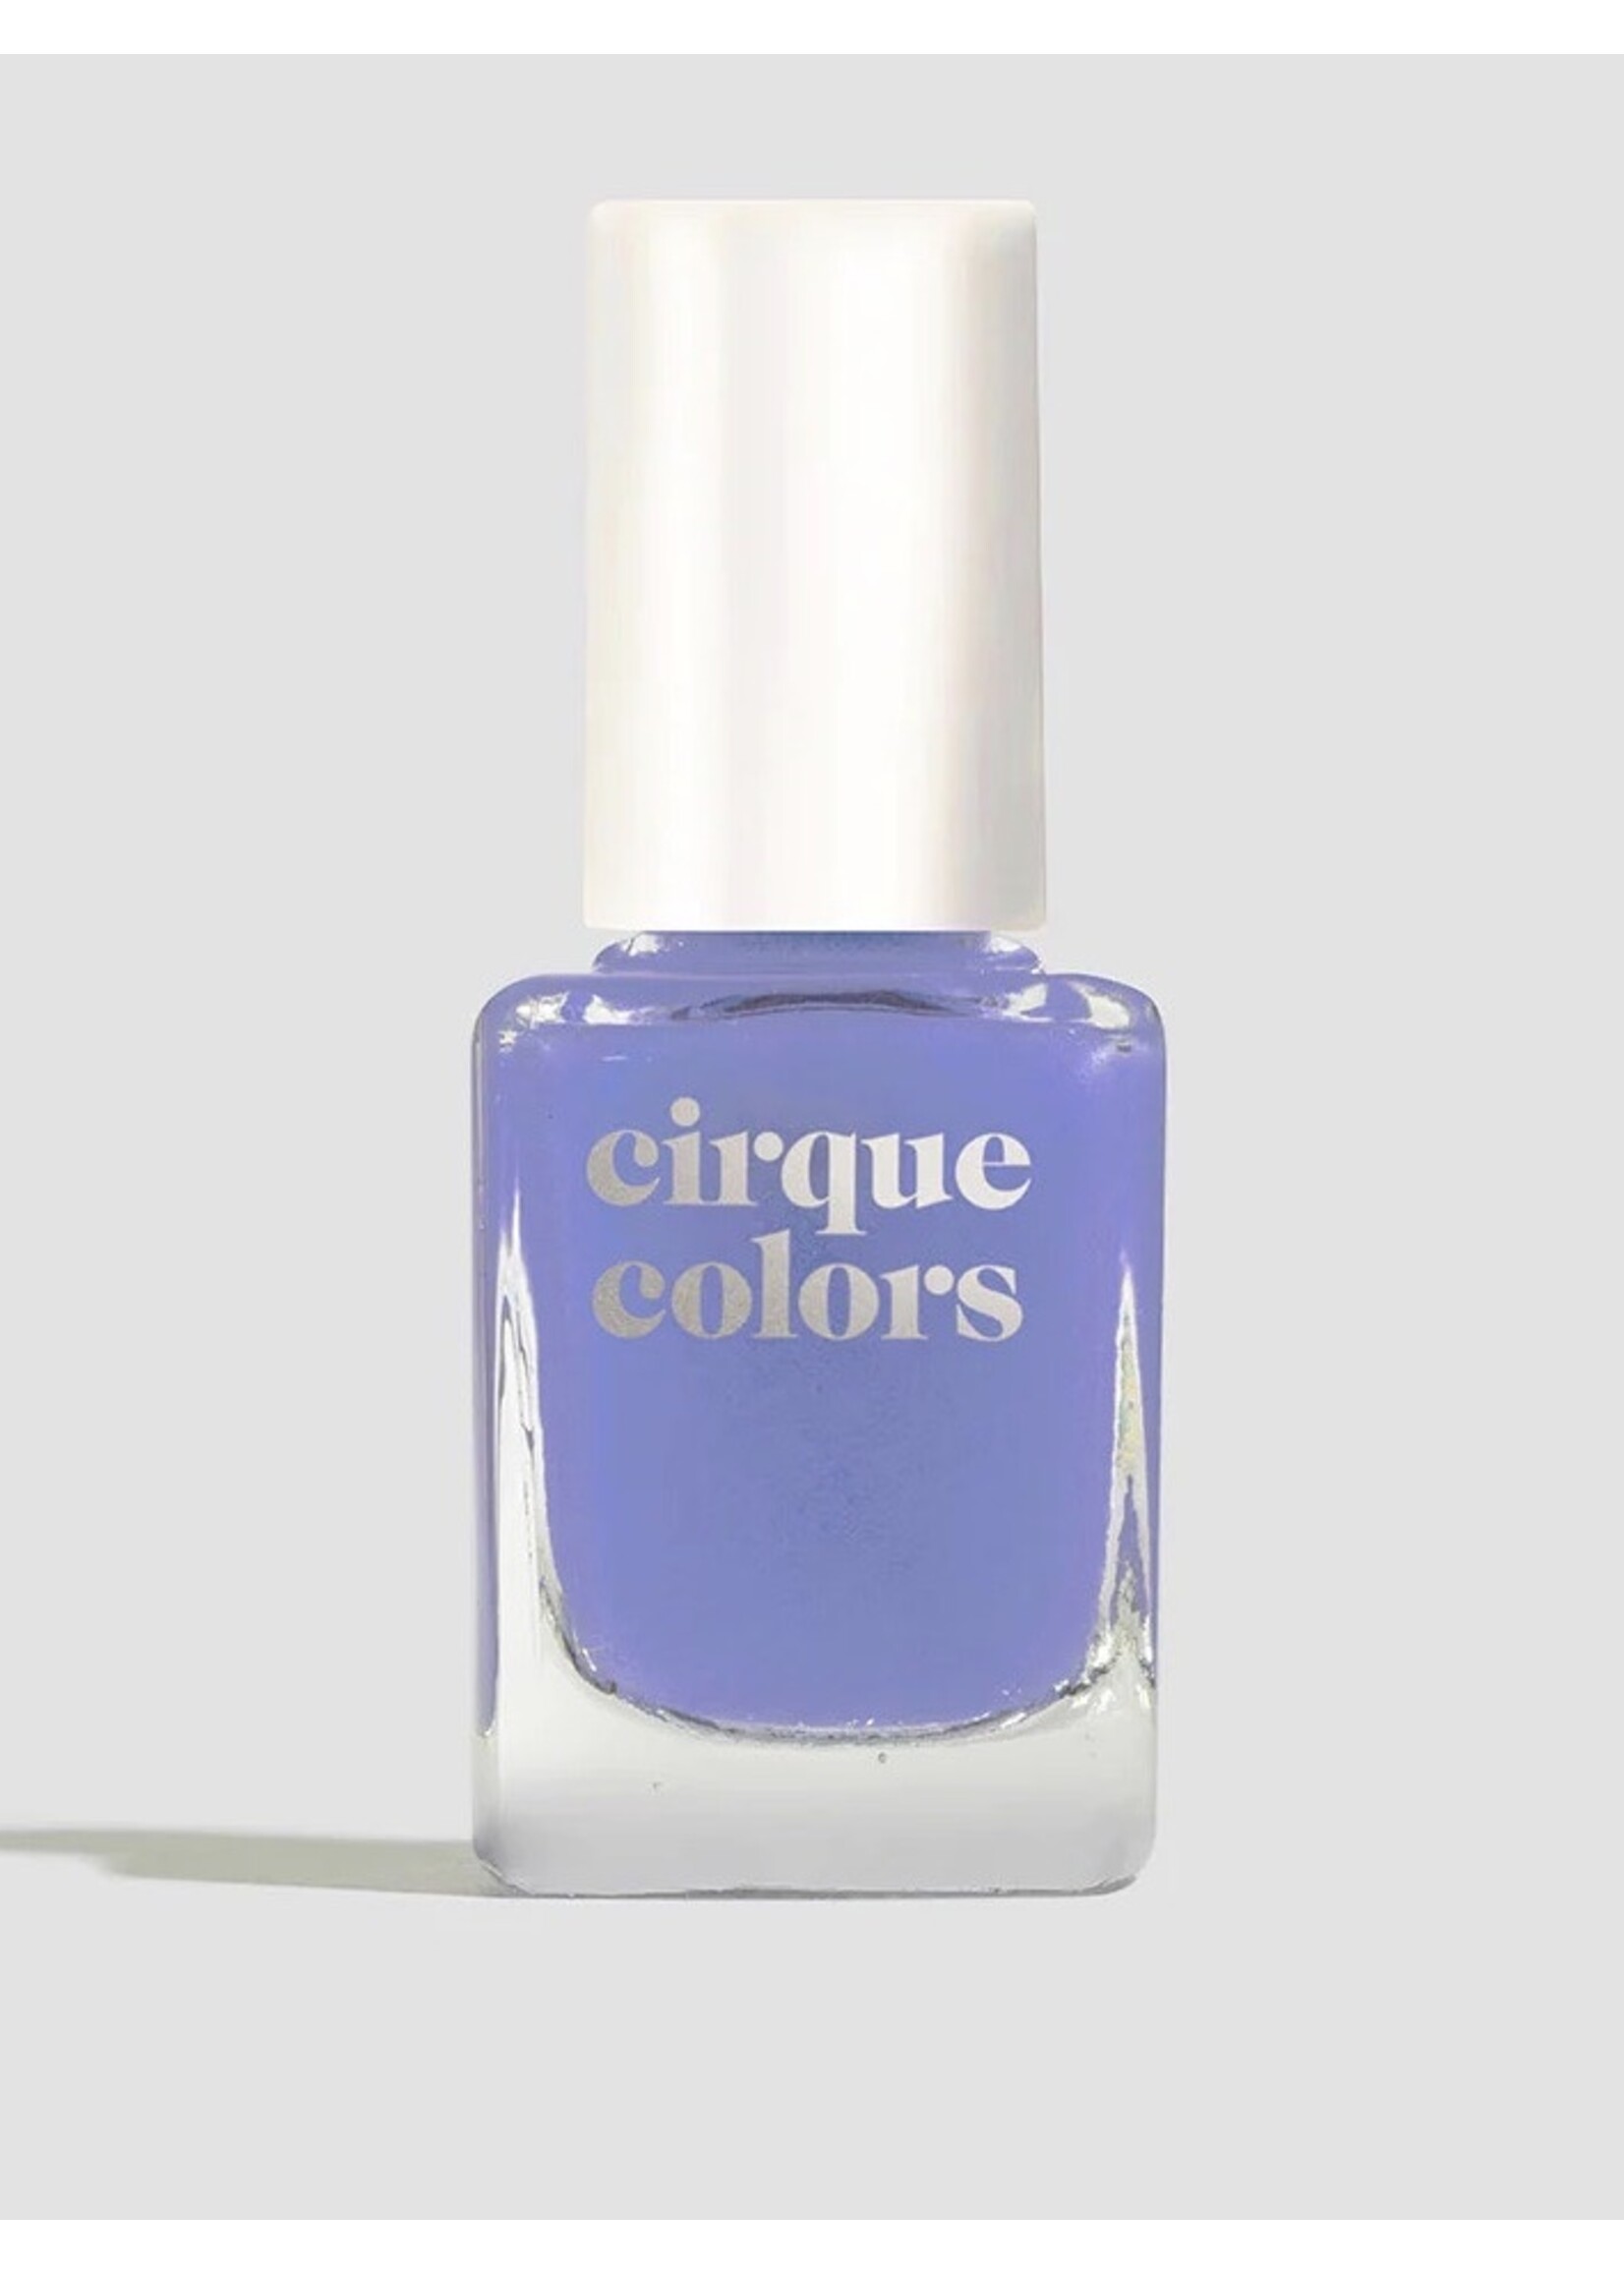 Cirque Colors Nail polishes "Scream Kween" by Cirque Colors